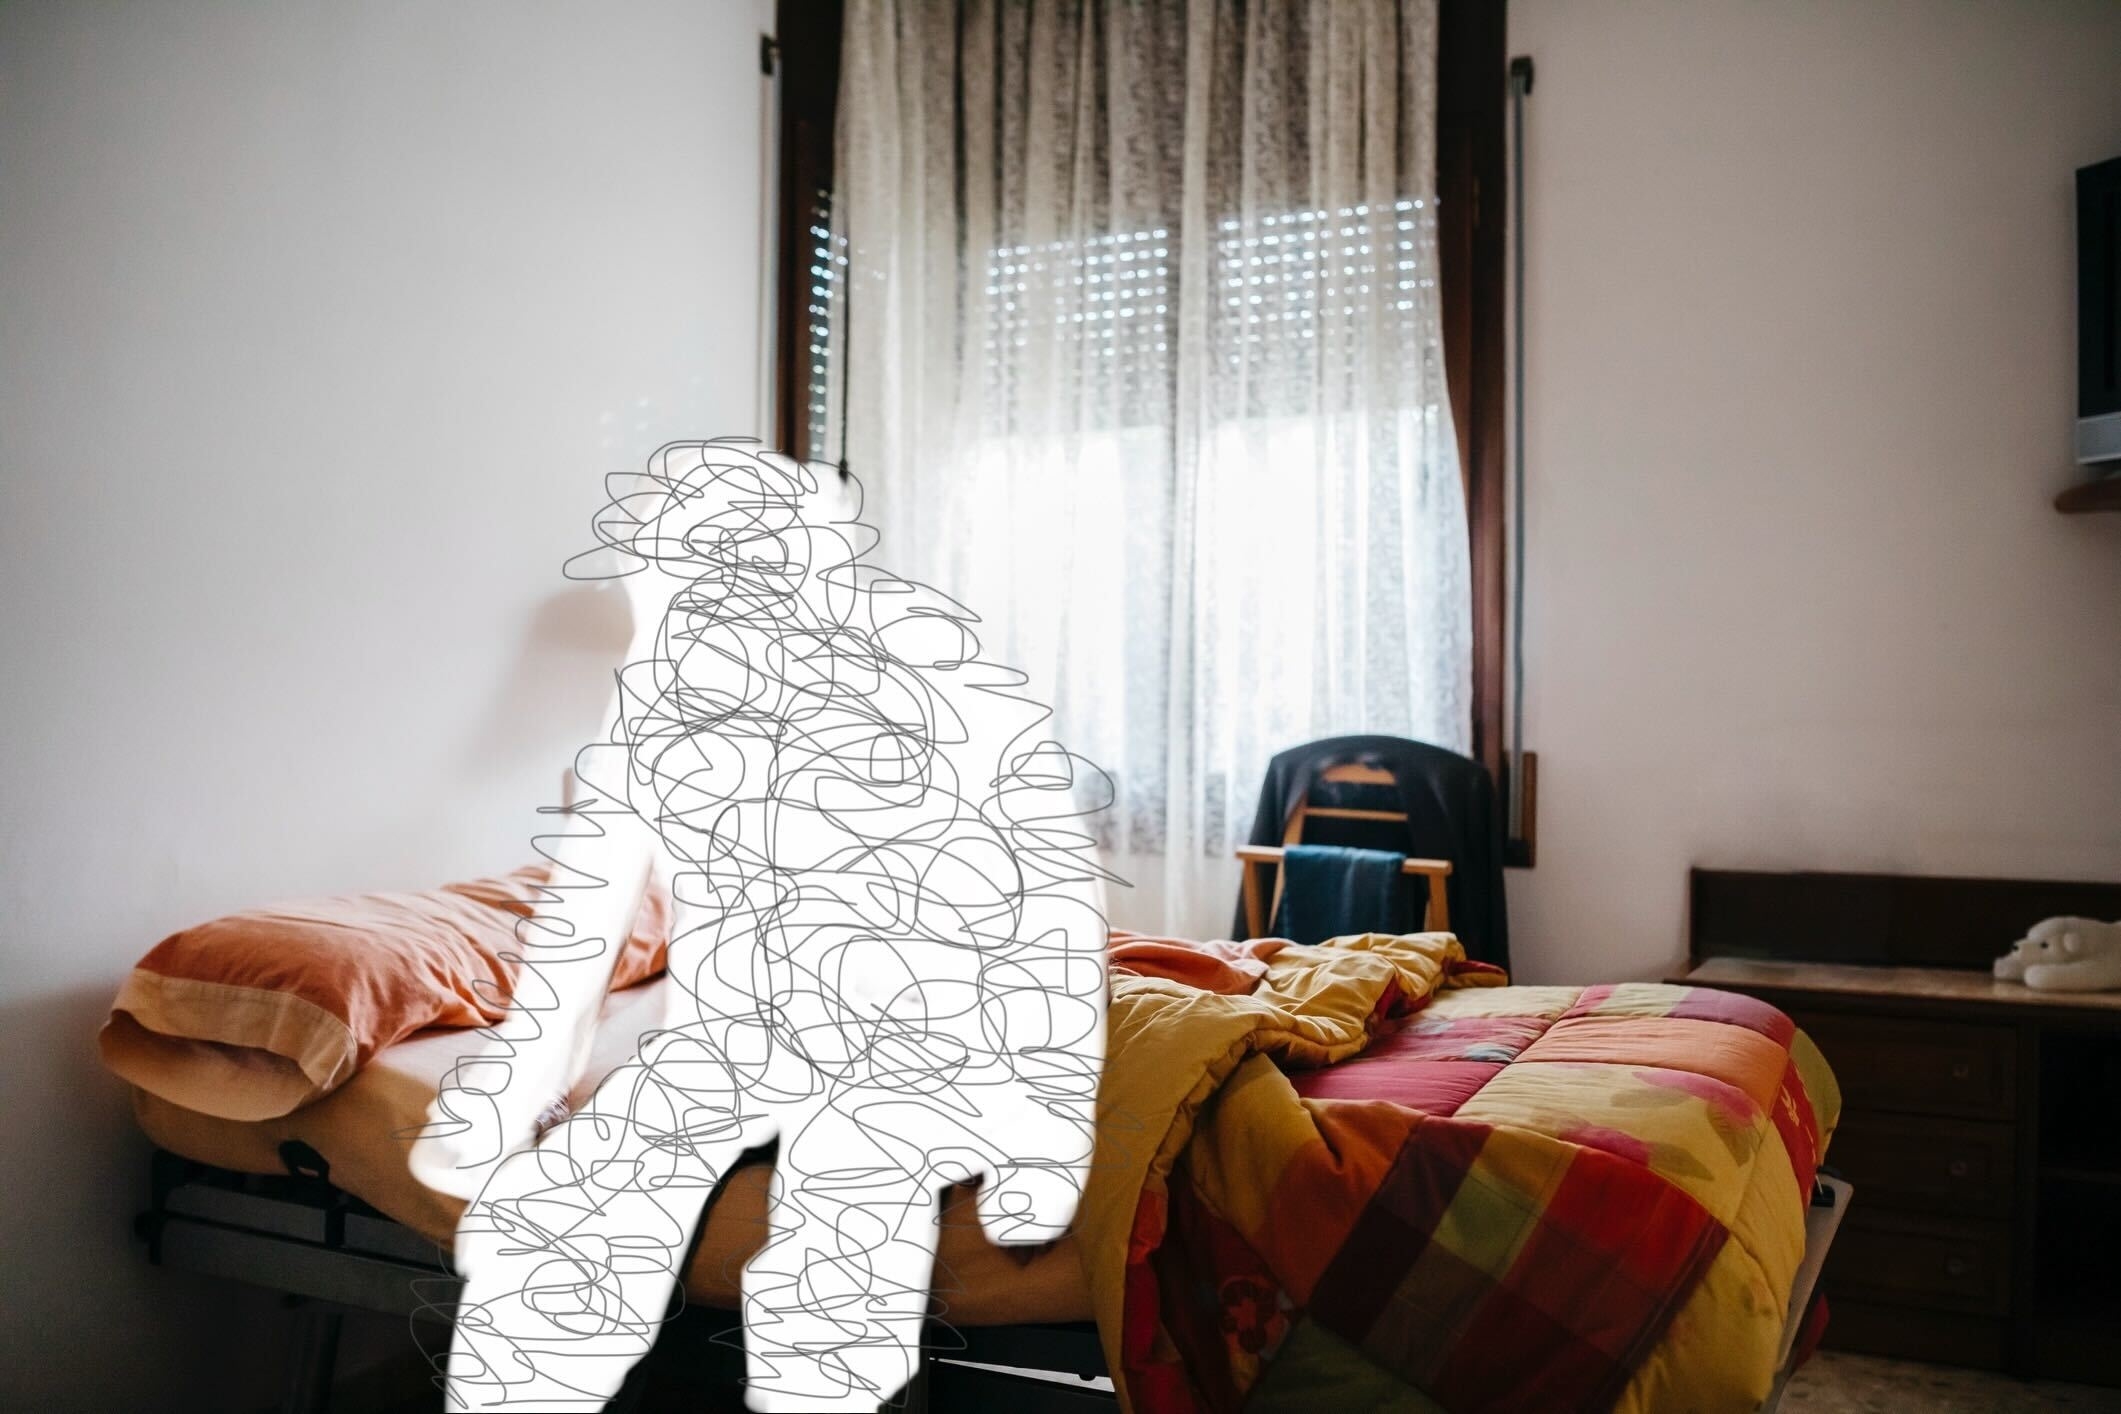 Person-shaped outline made of squiggly lines is superimposed over a bedroom, creating an abstract visual effect